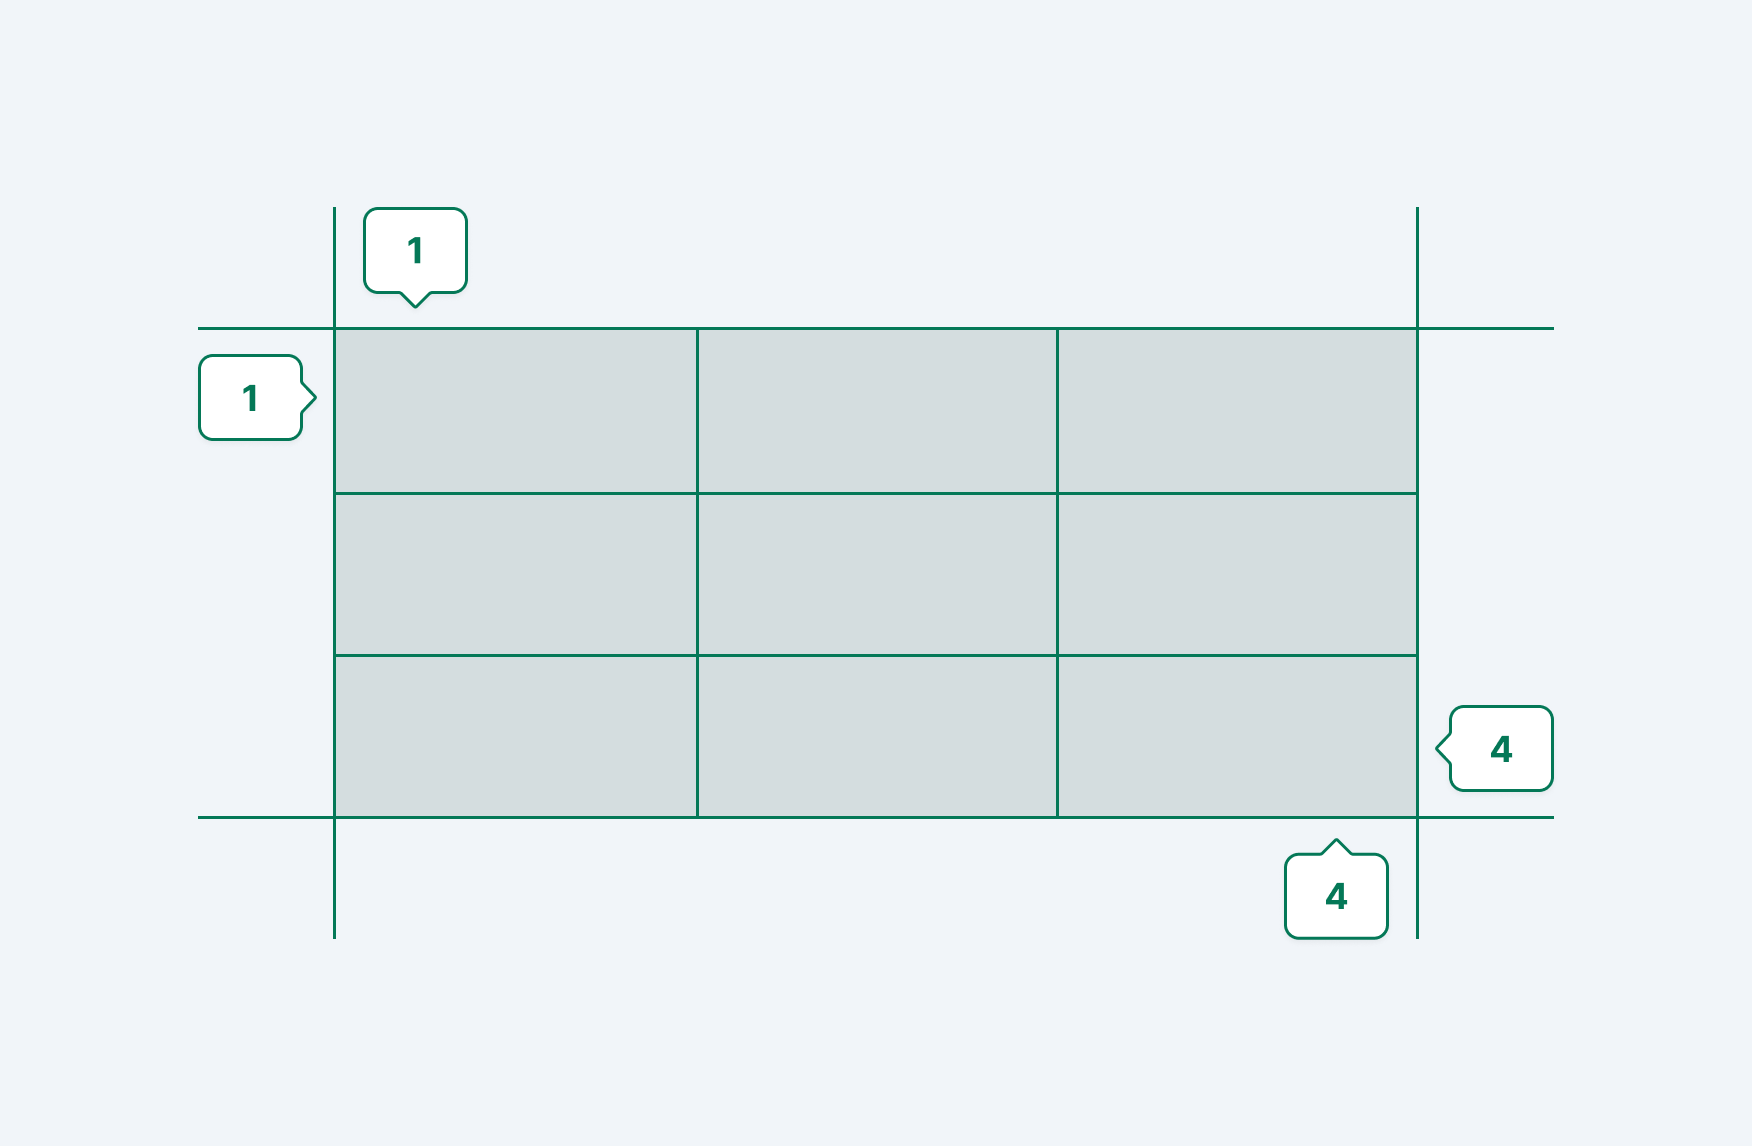 An illustration of a three column by three row CSS grid, denoting the starting and ending track lines (1 and 4)